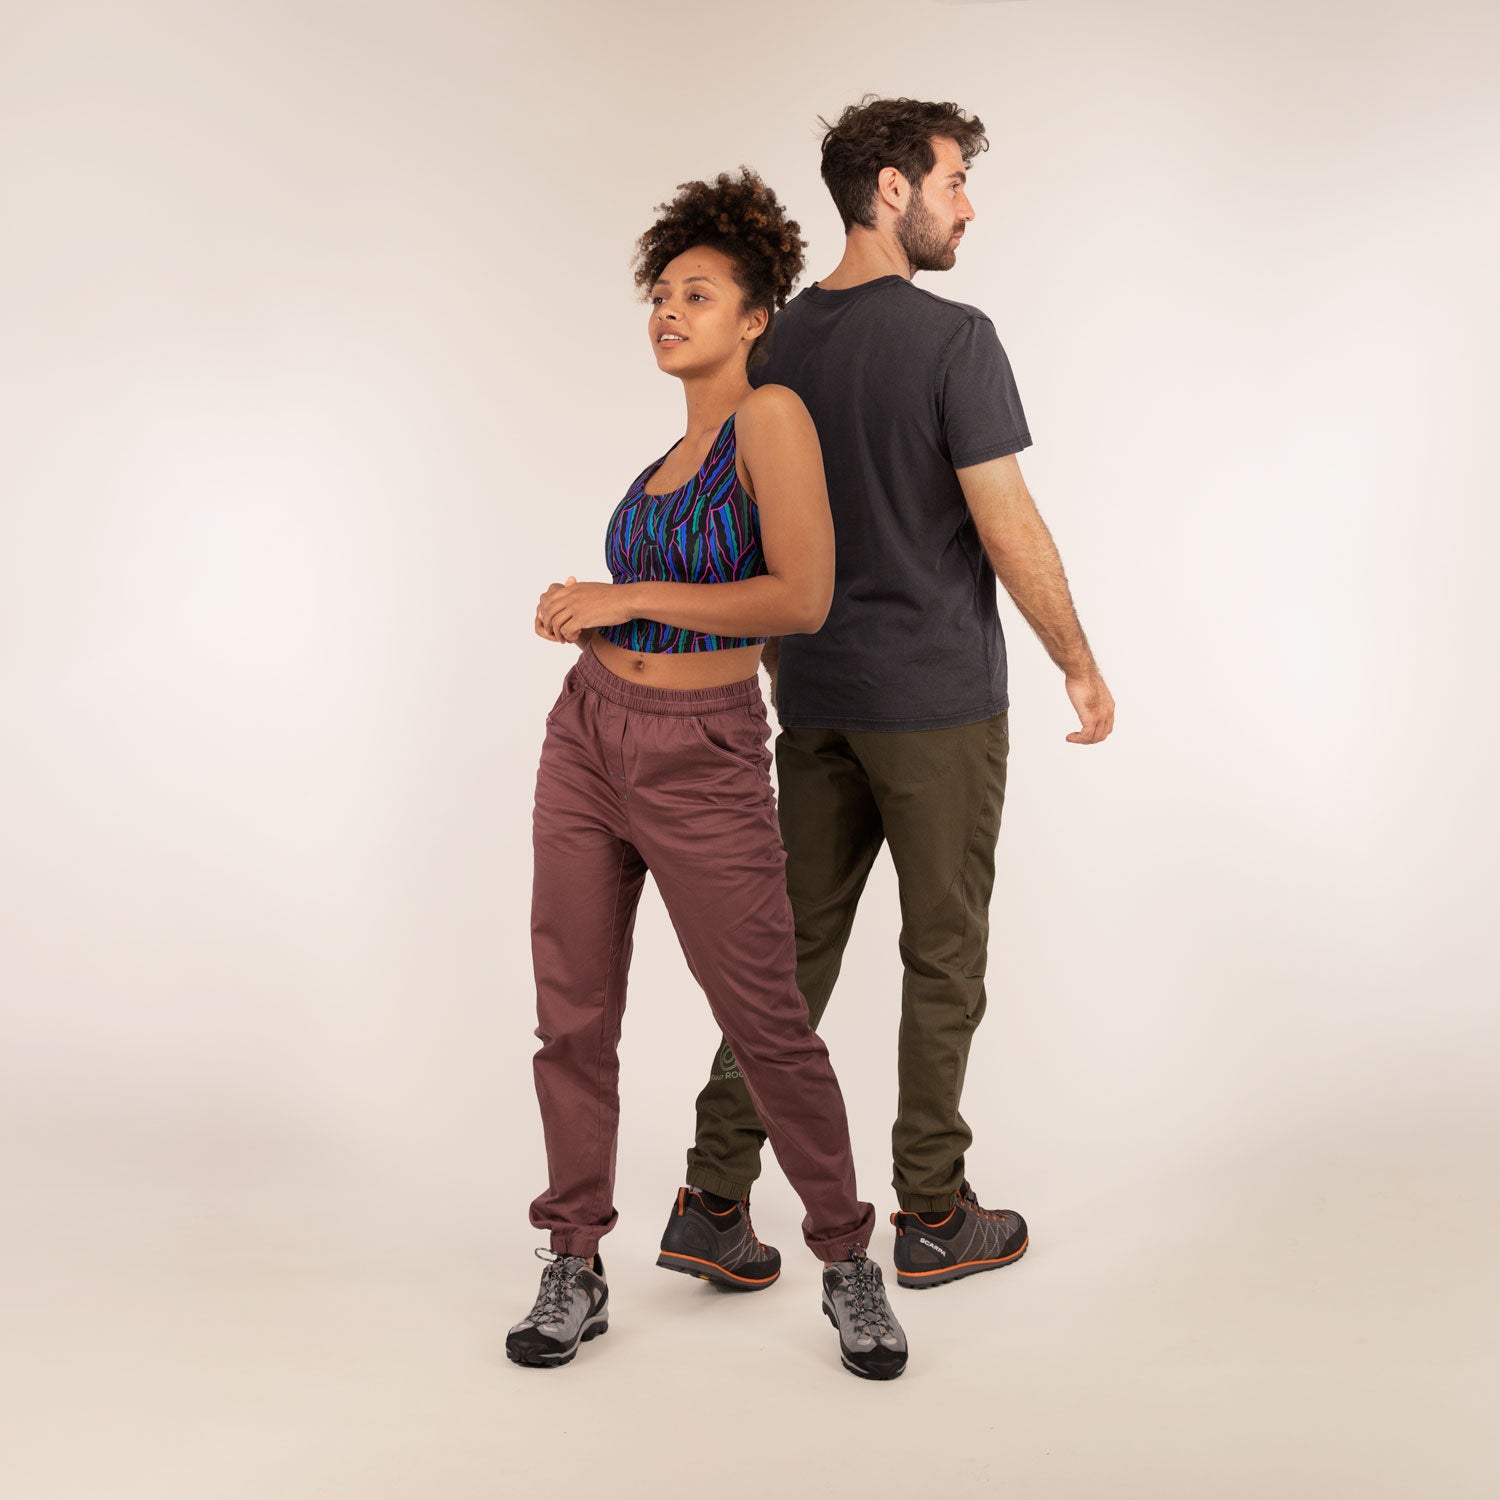 3RD ROCK Clothing MARGO Adventure ready trousers - Kendal is 5ft 7" with a 28" waist, 38" hips and wears a size 30/RL Oliver is 6ft 2" with a 34" waist, 40" hips and wears a 34/LL